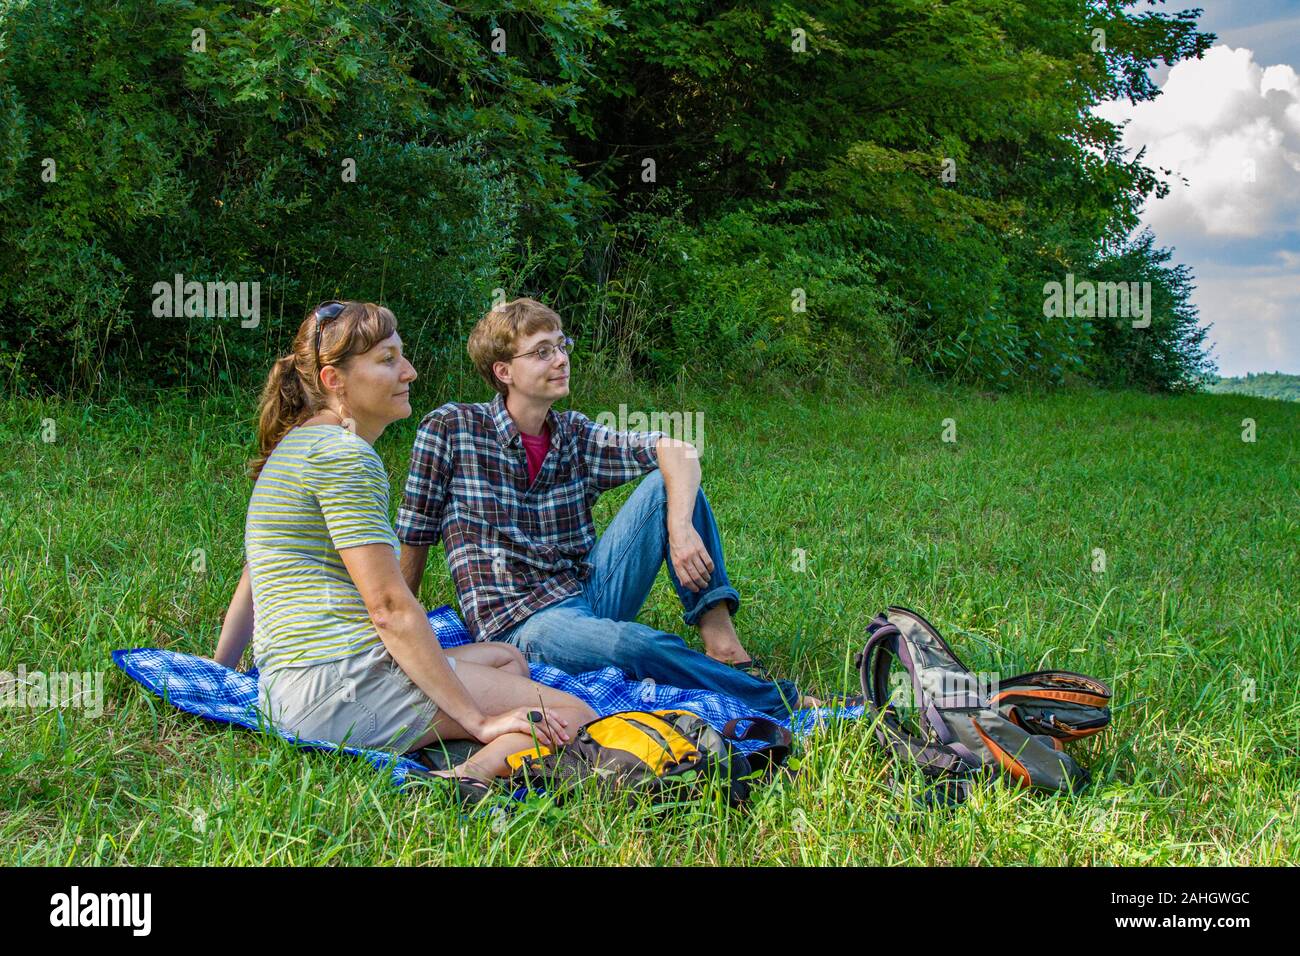 Couple enjoying the outdoors on a summer day Stock Photo